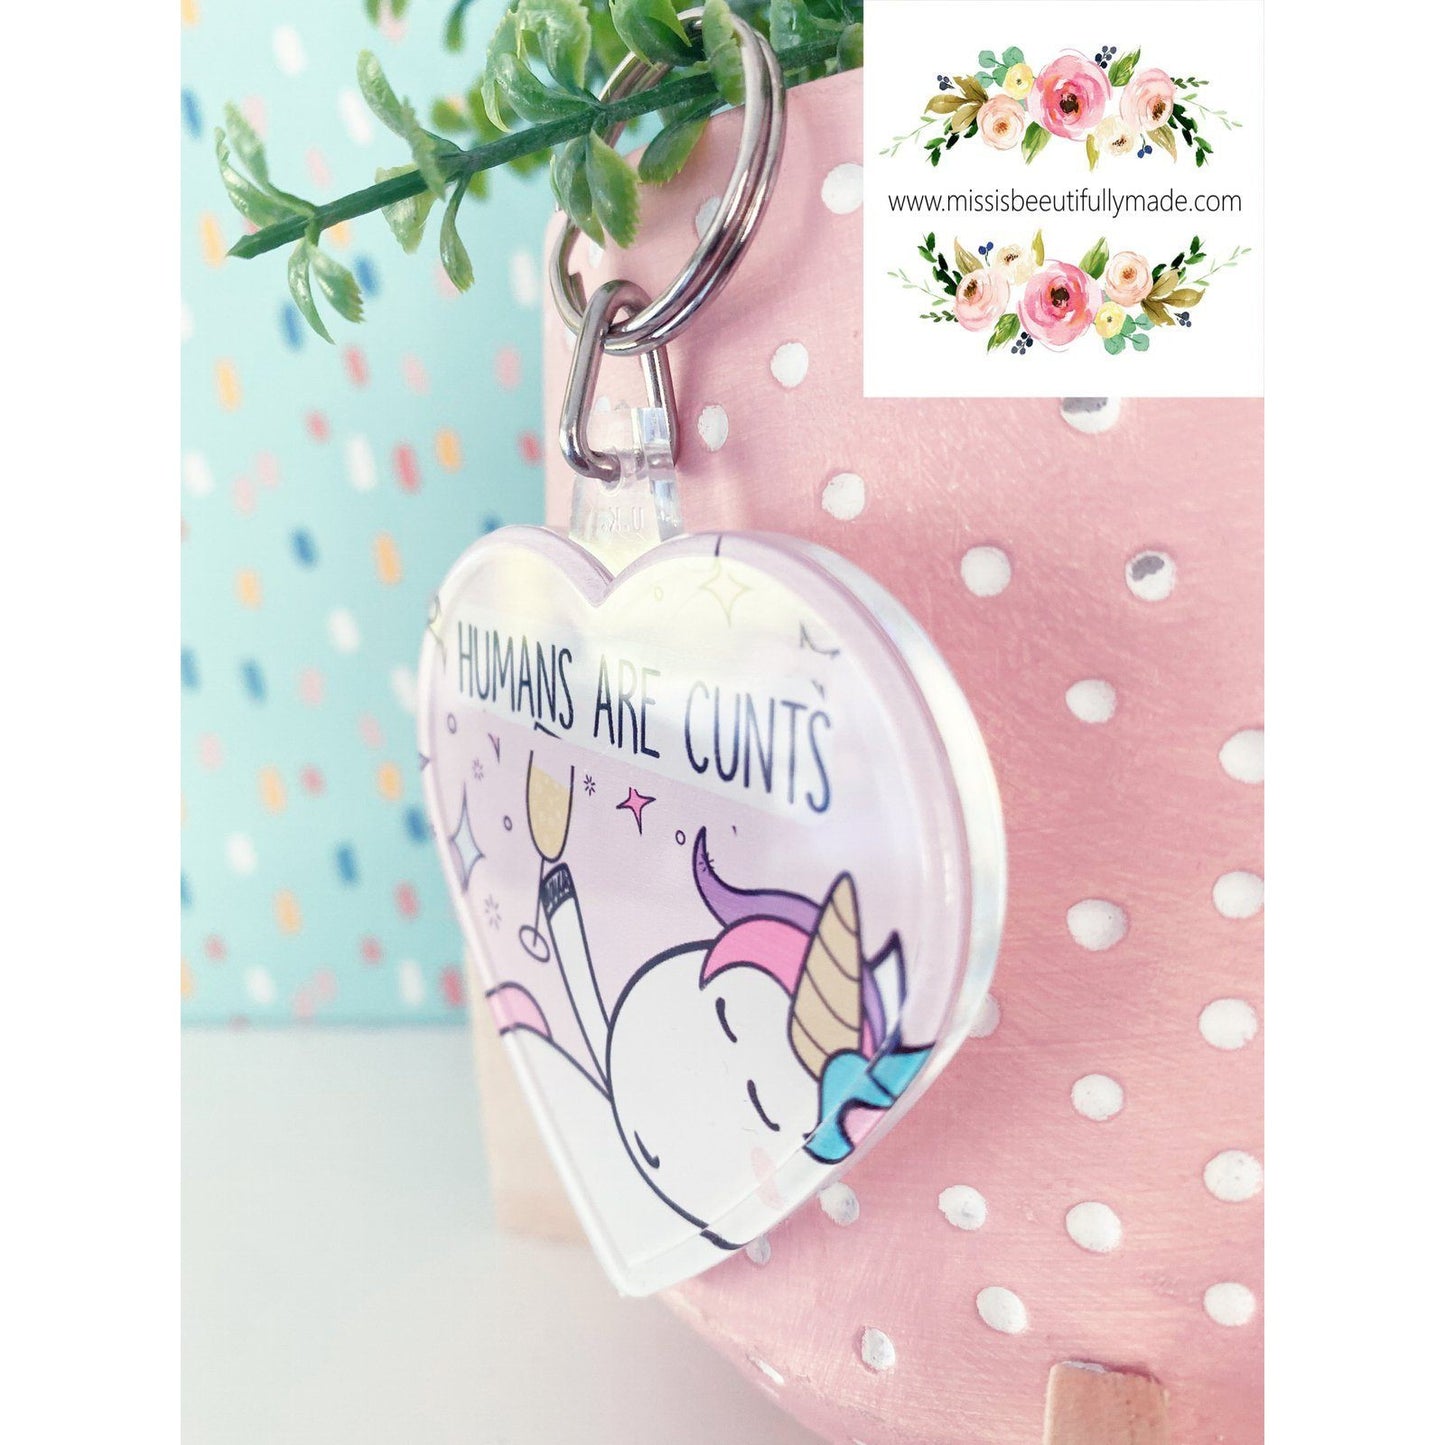 Large Heart keyring - Humans are cunts